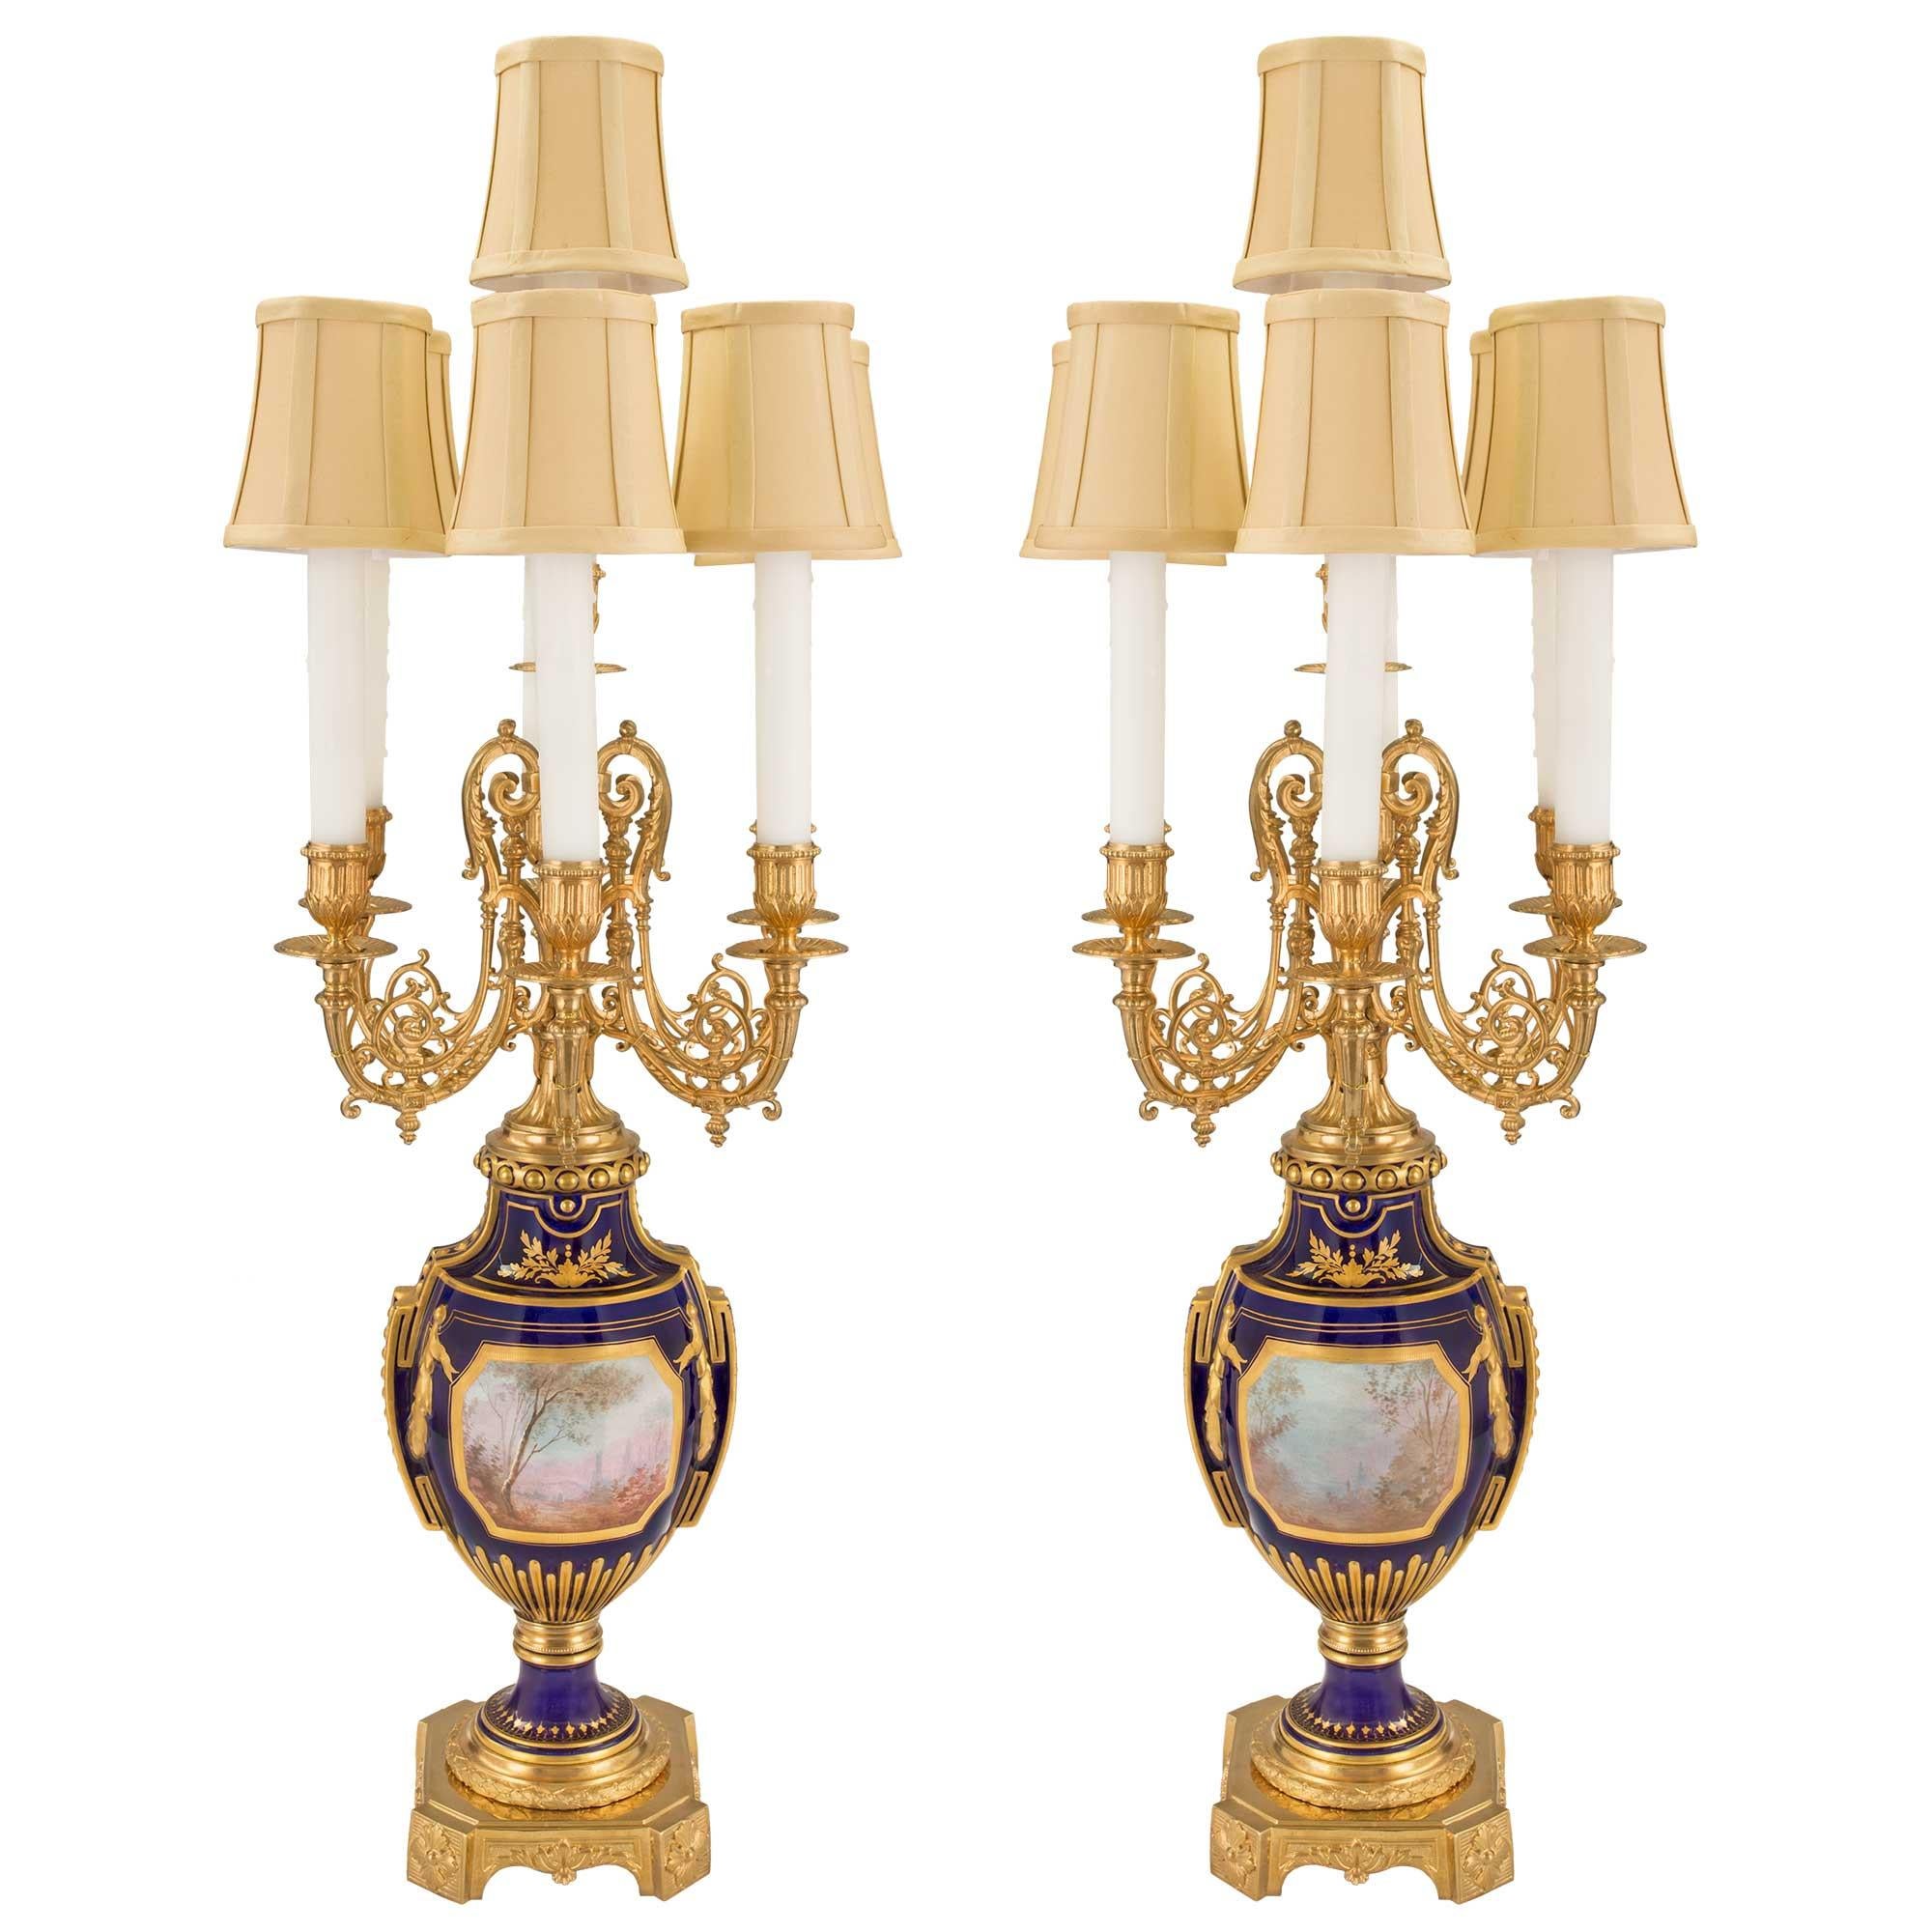 Pair of French 19th Century Louis XVI Sèvres Porcelain and Ormolu Candelabras For Sale 6